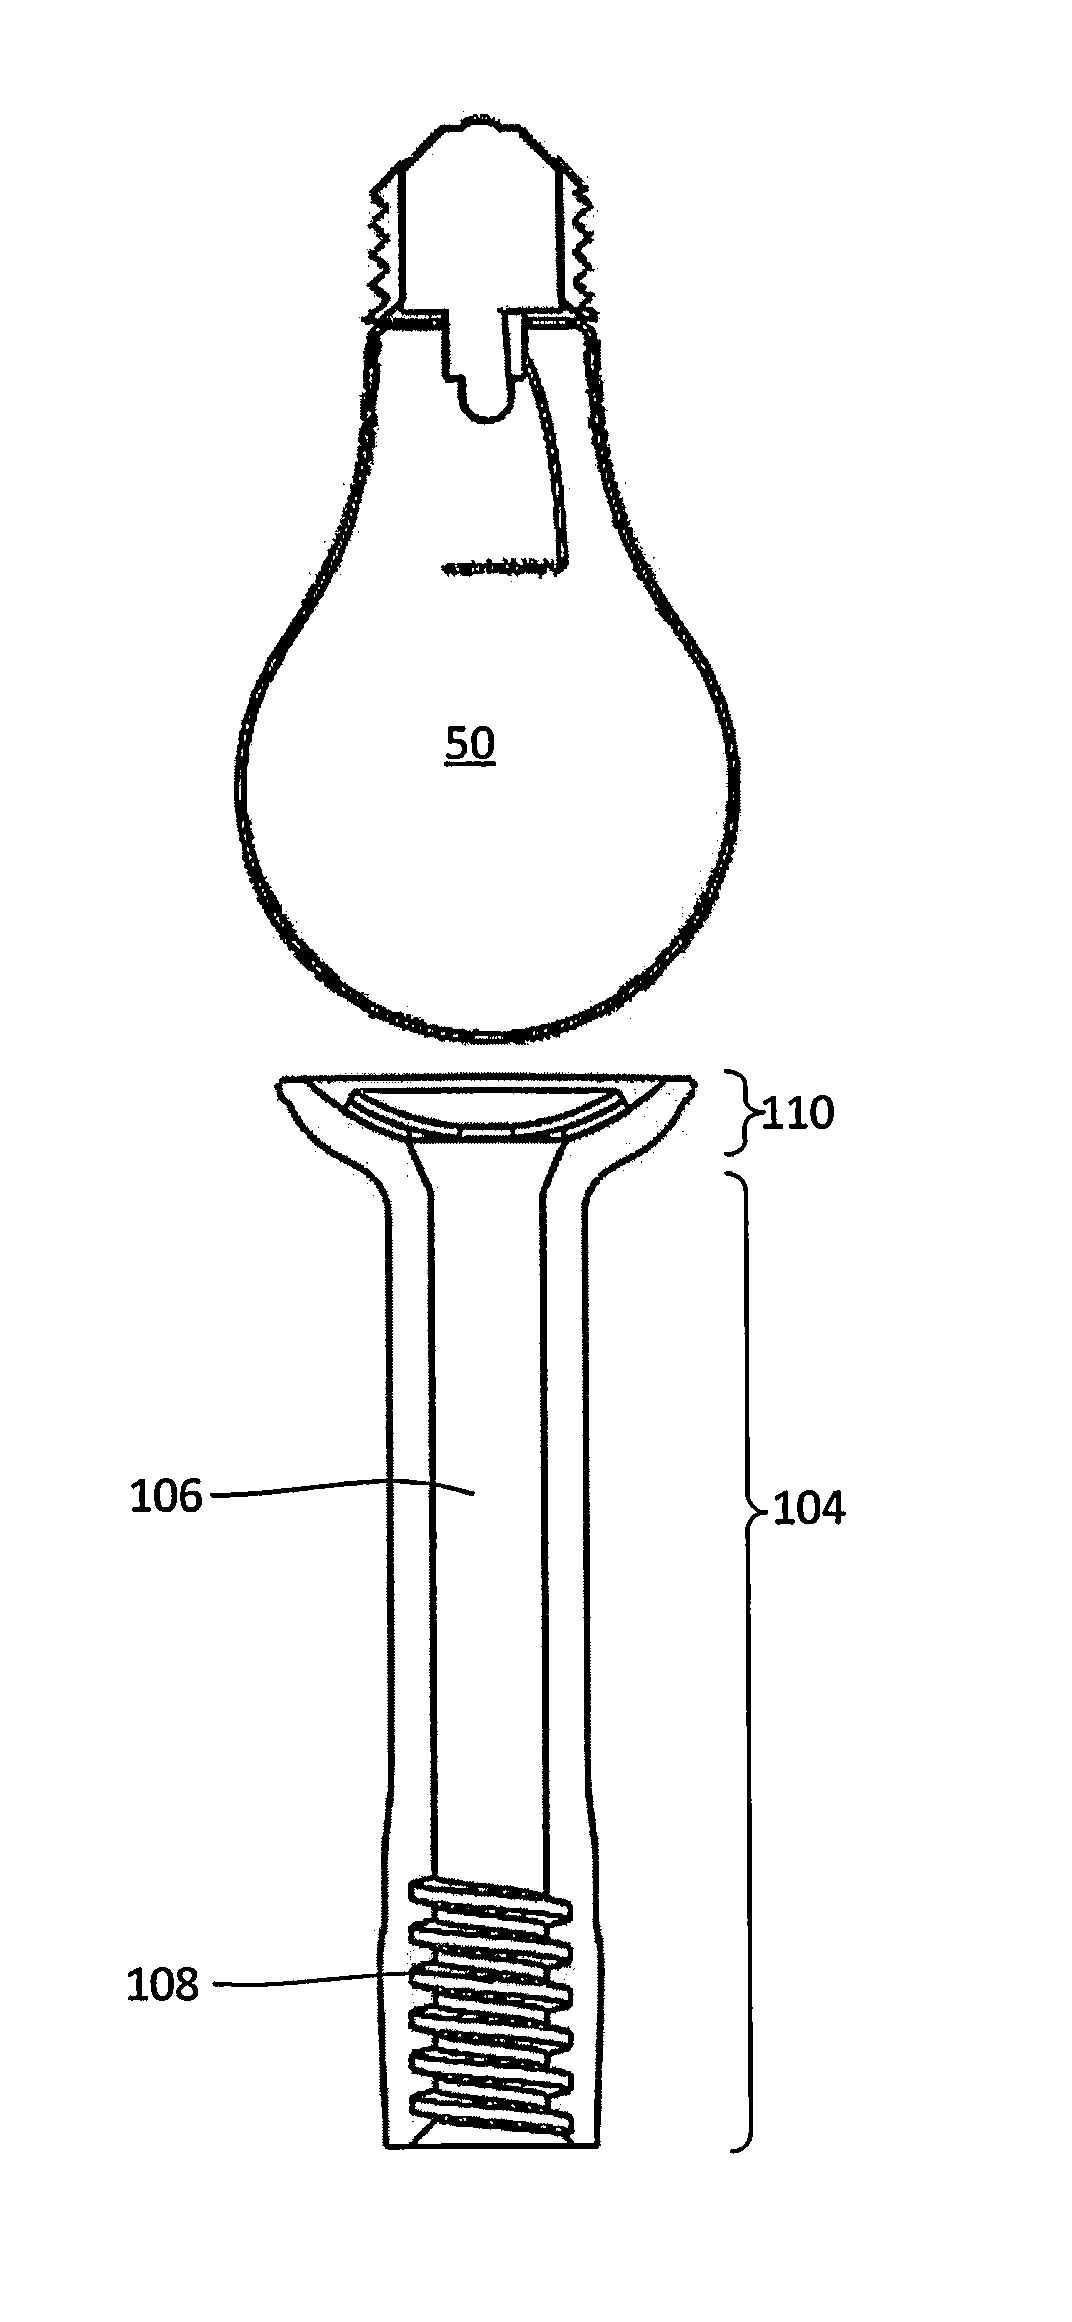 Light bulb installation and removal tool